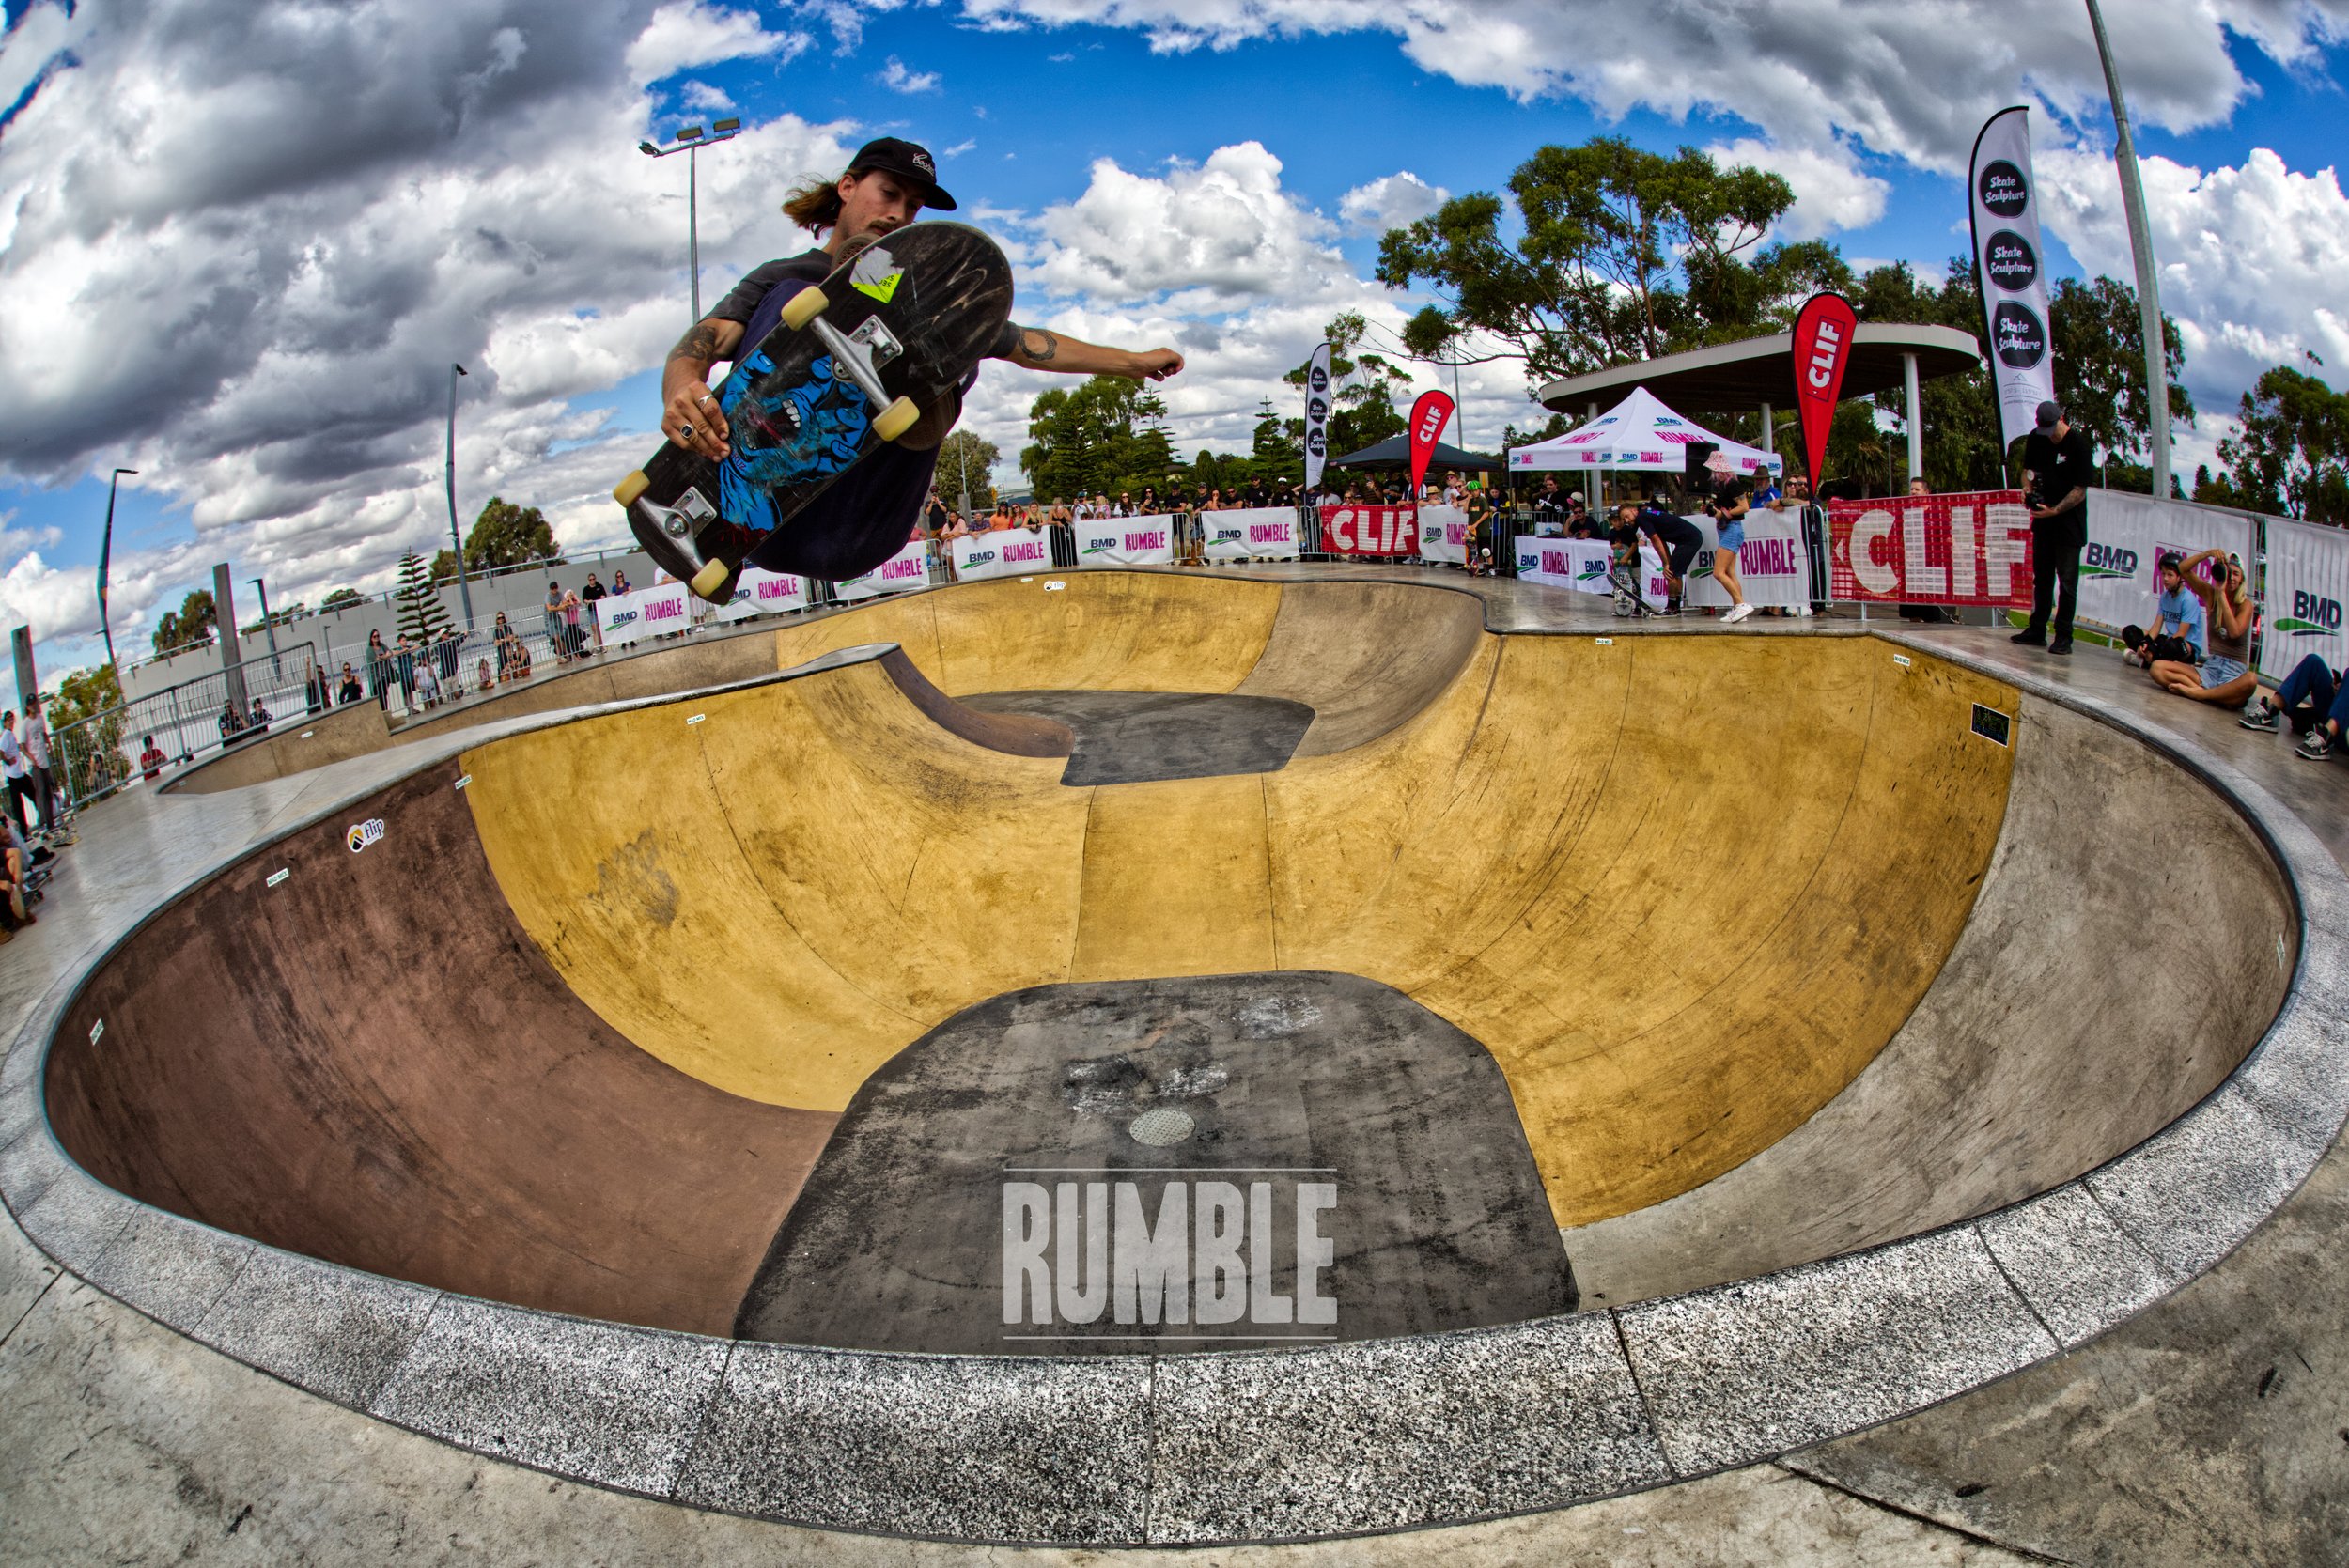 BMD Eastern Rumble Bowlriding Event